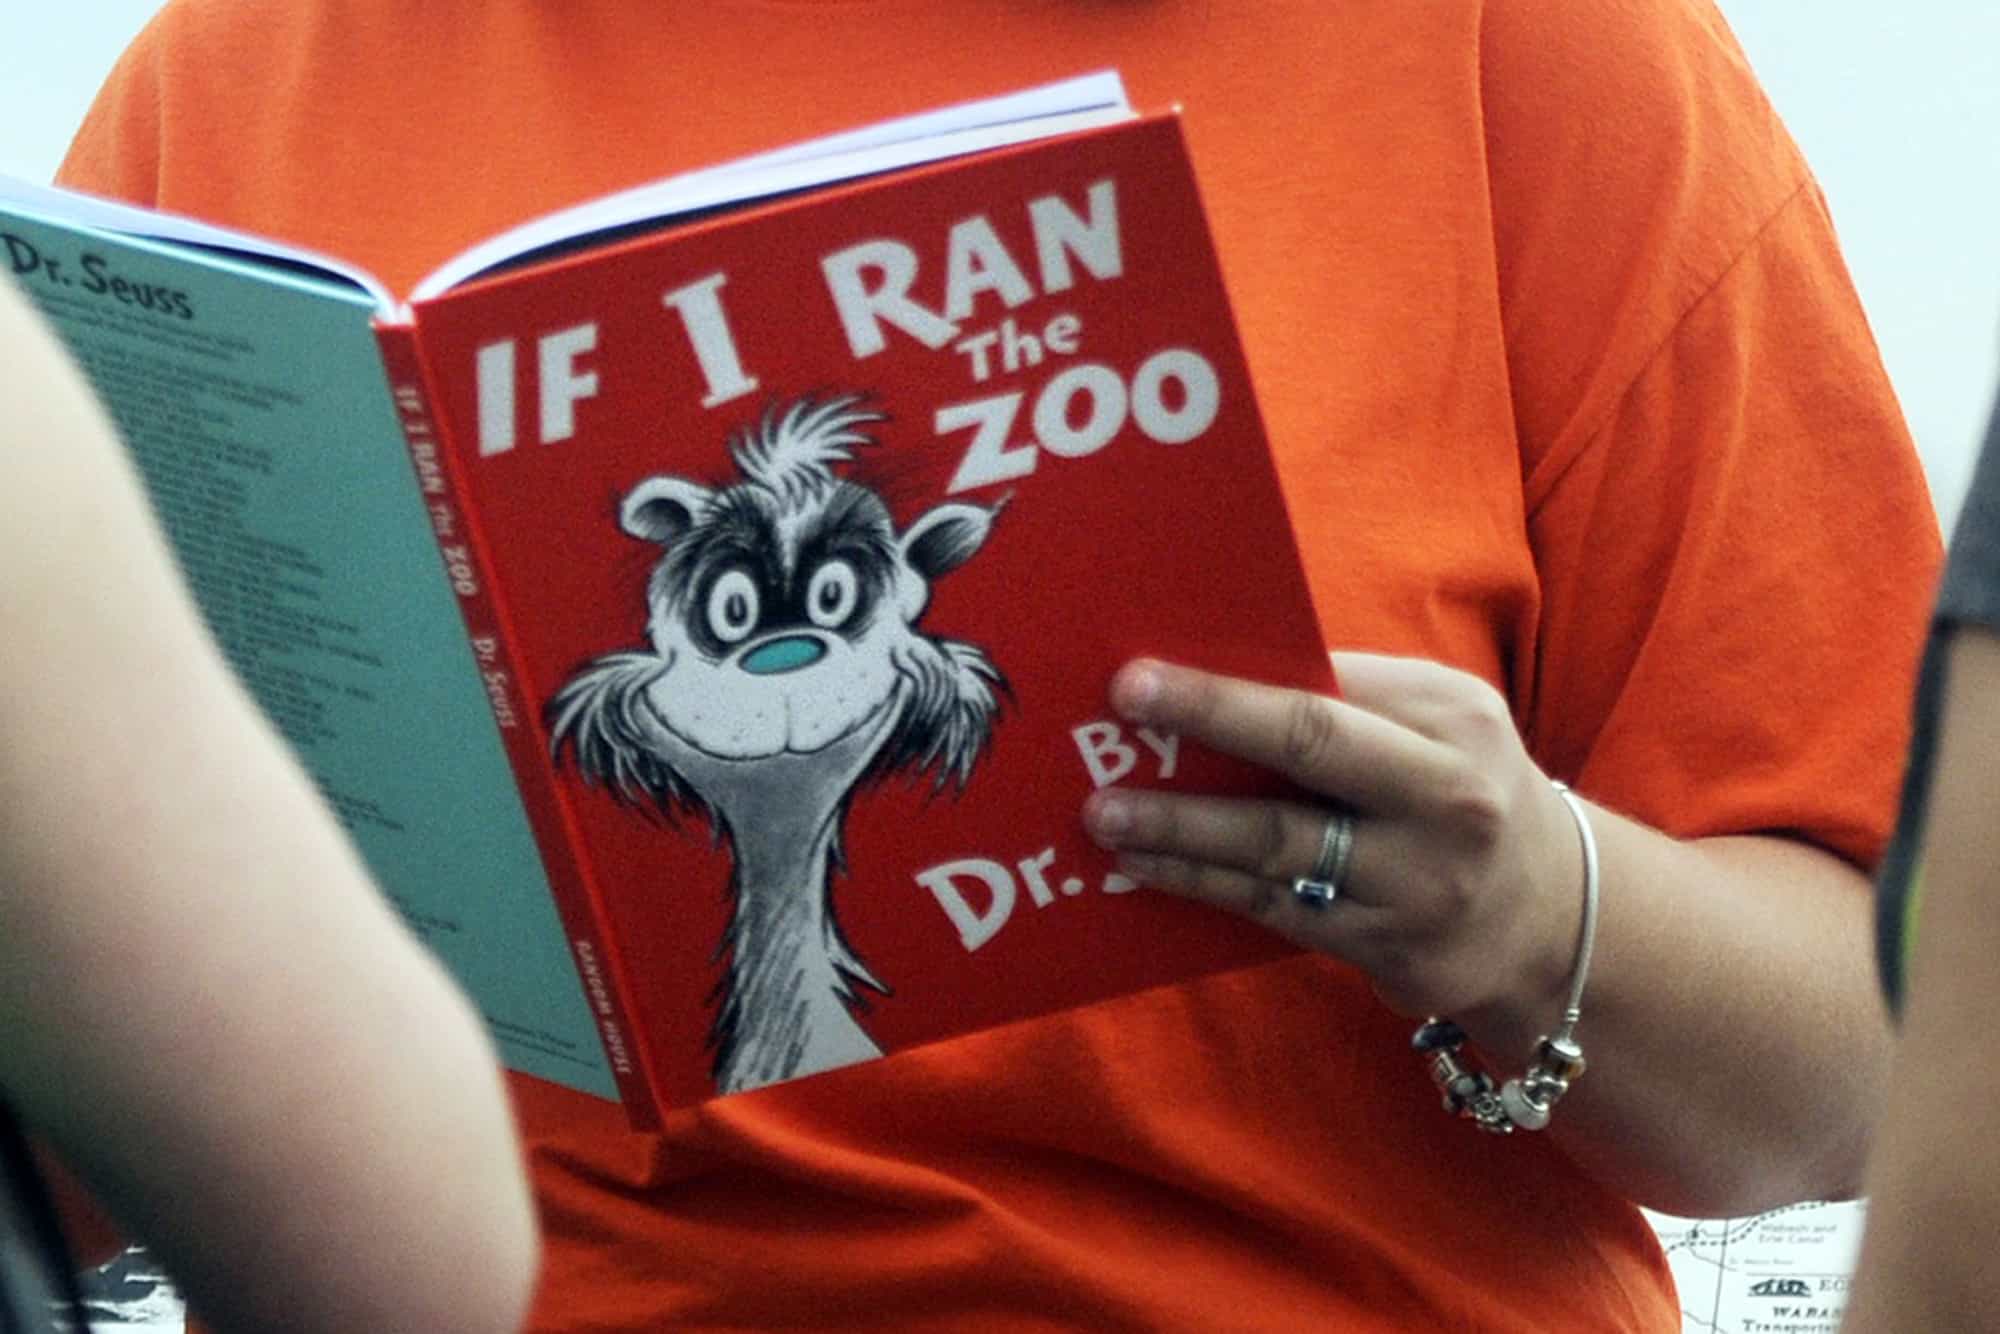 ‘Steeped in racist propaganda’ Dr Seuss books to have publication ended